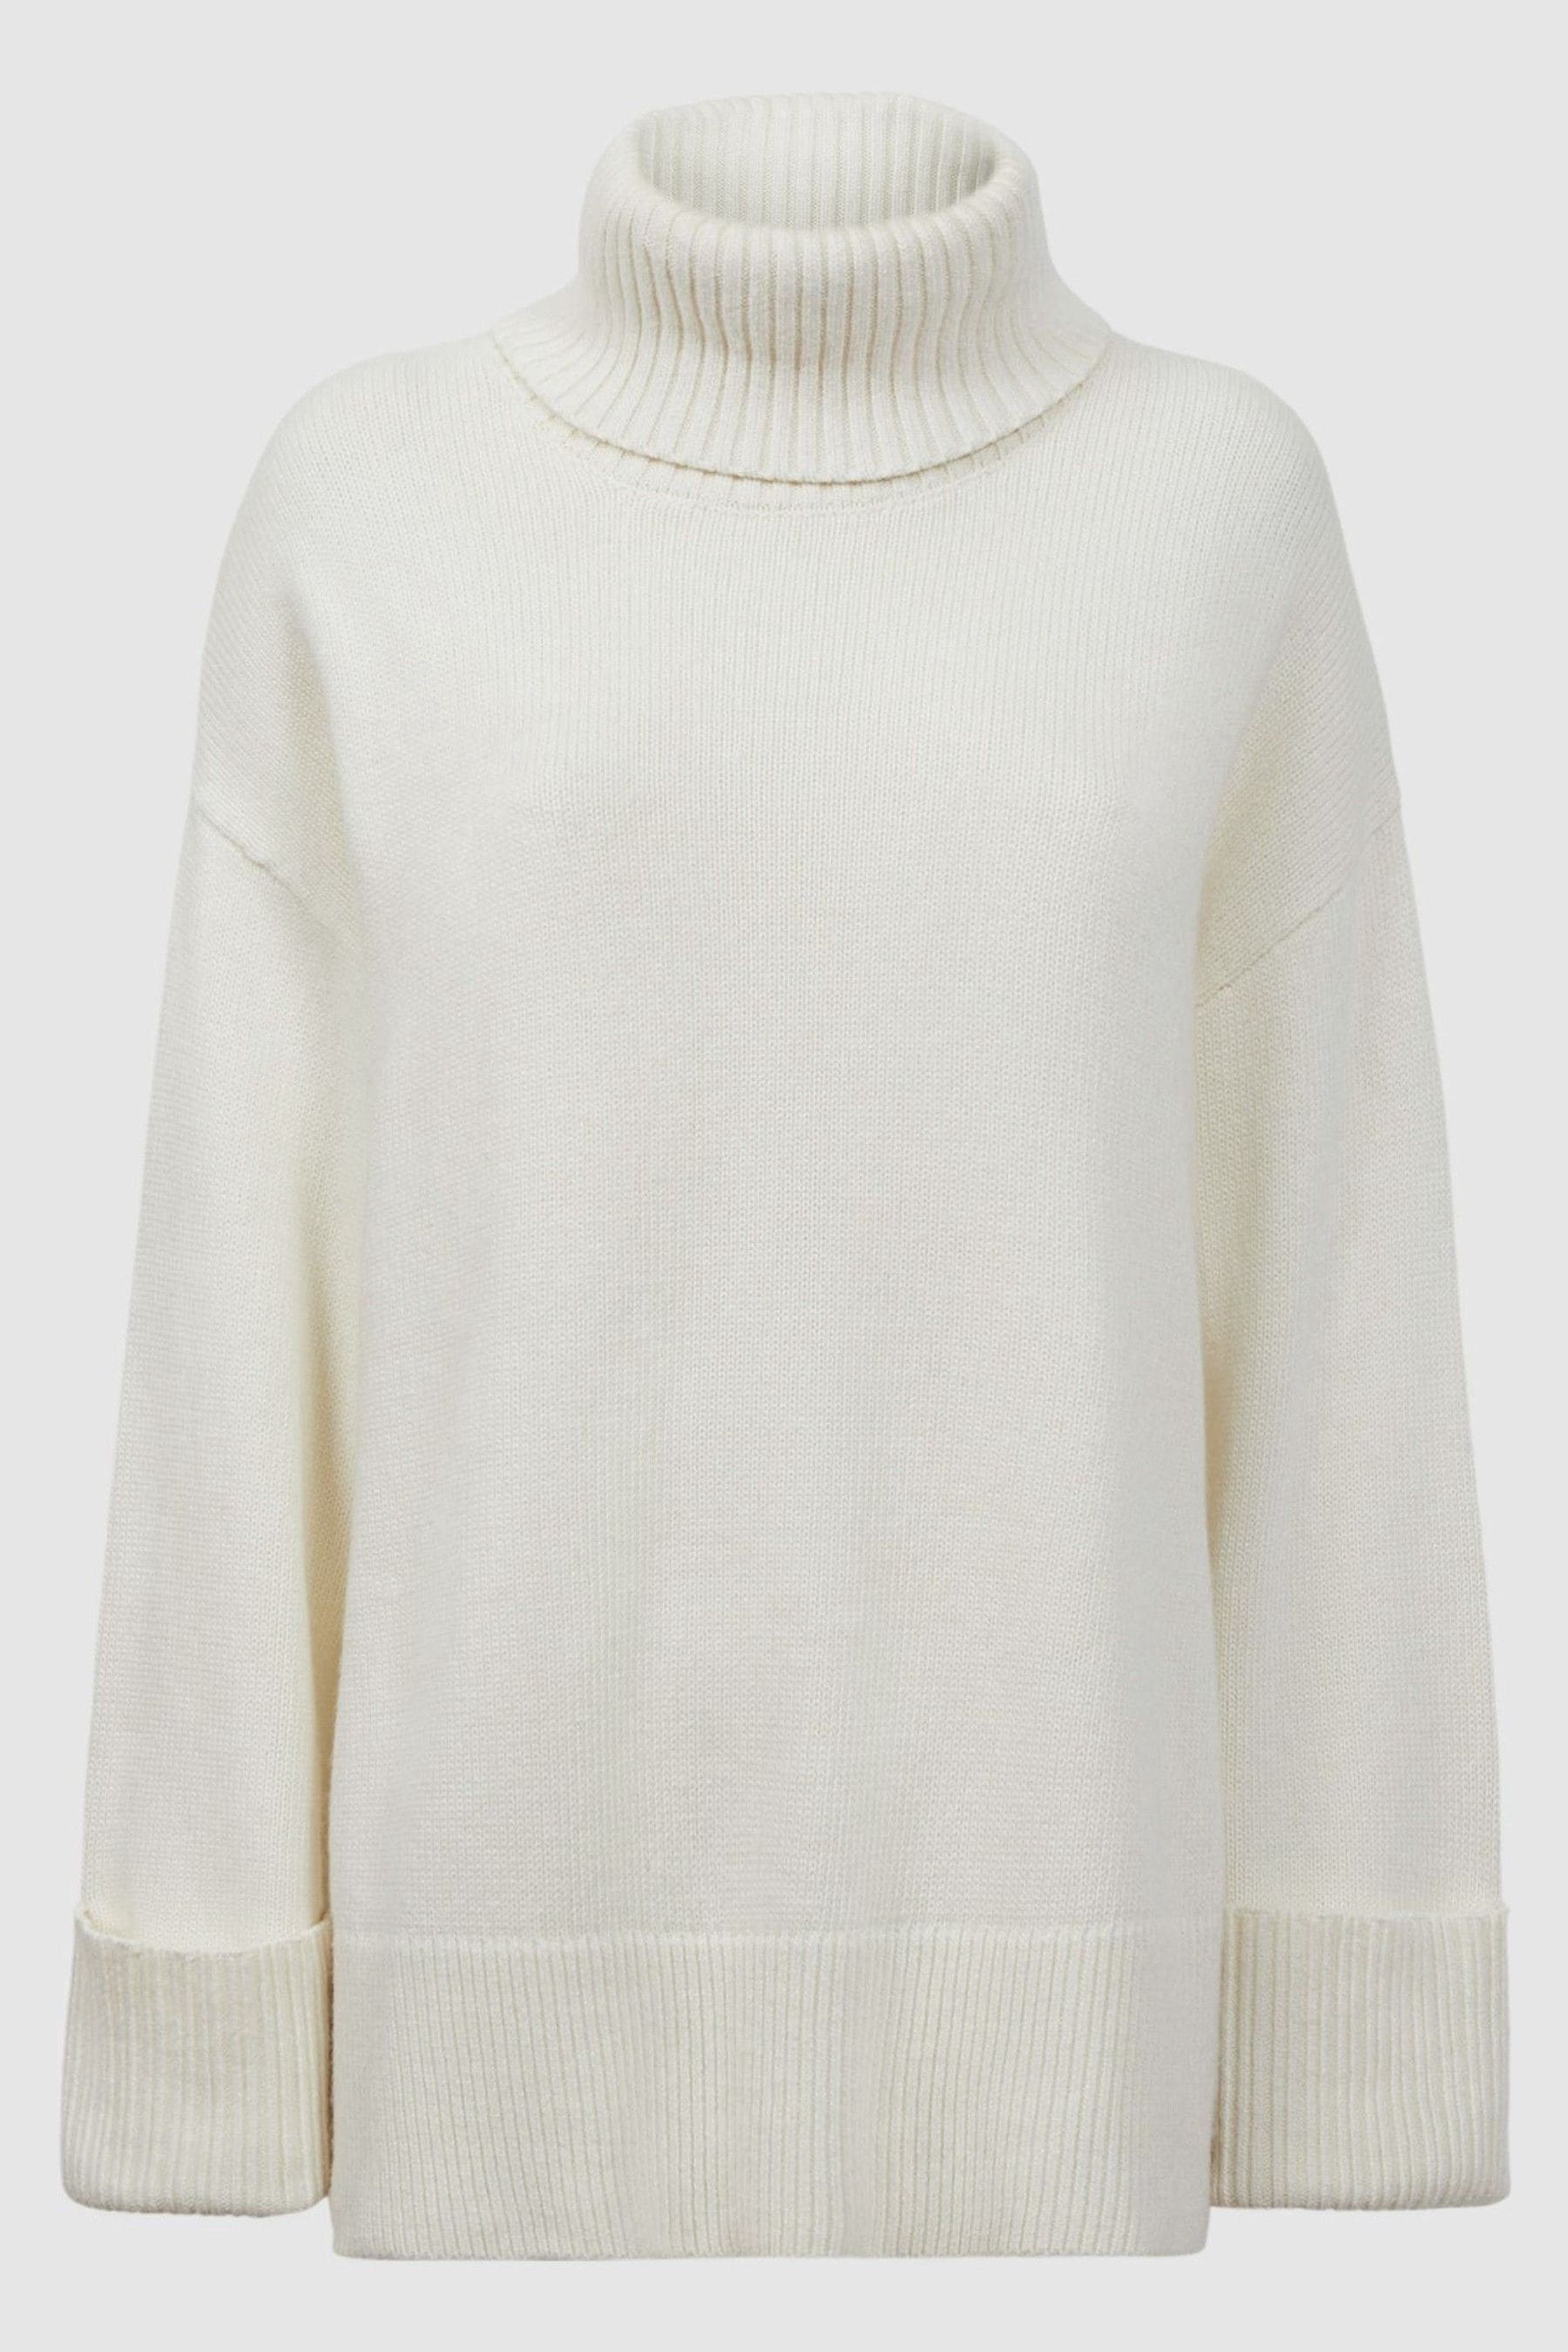 Buy Florere Cashmere Roll Neck Jumper from the Next UK online shop